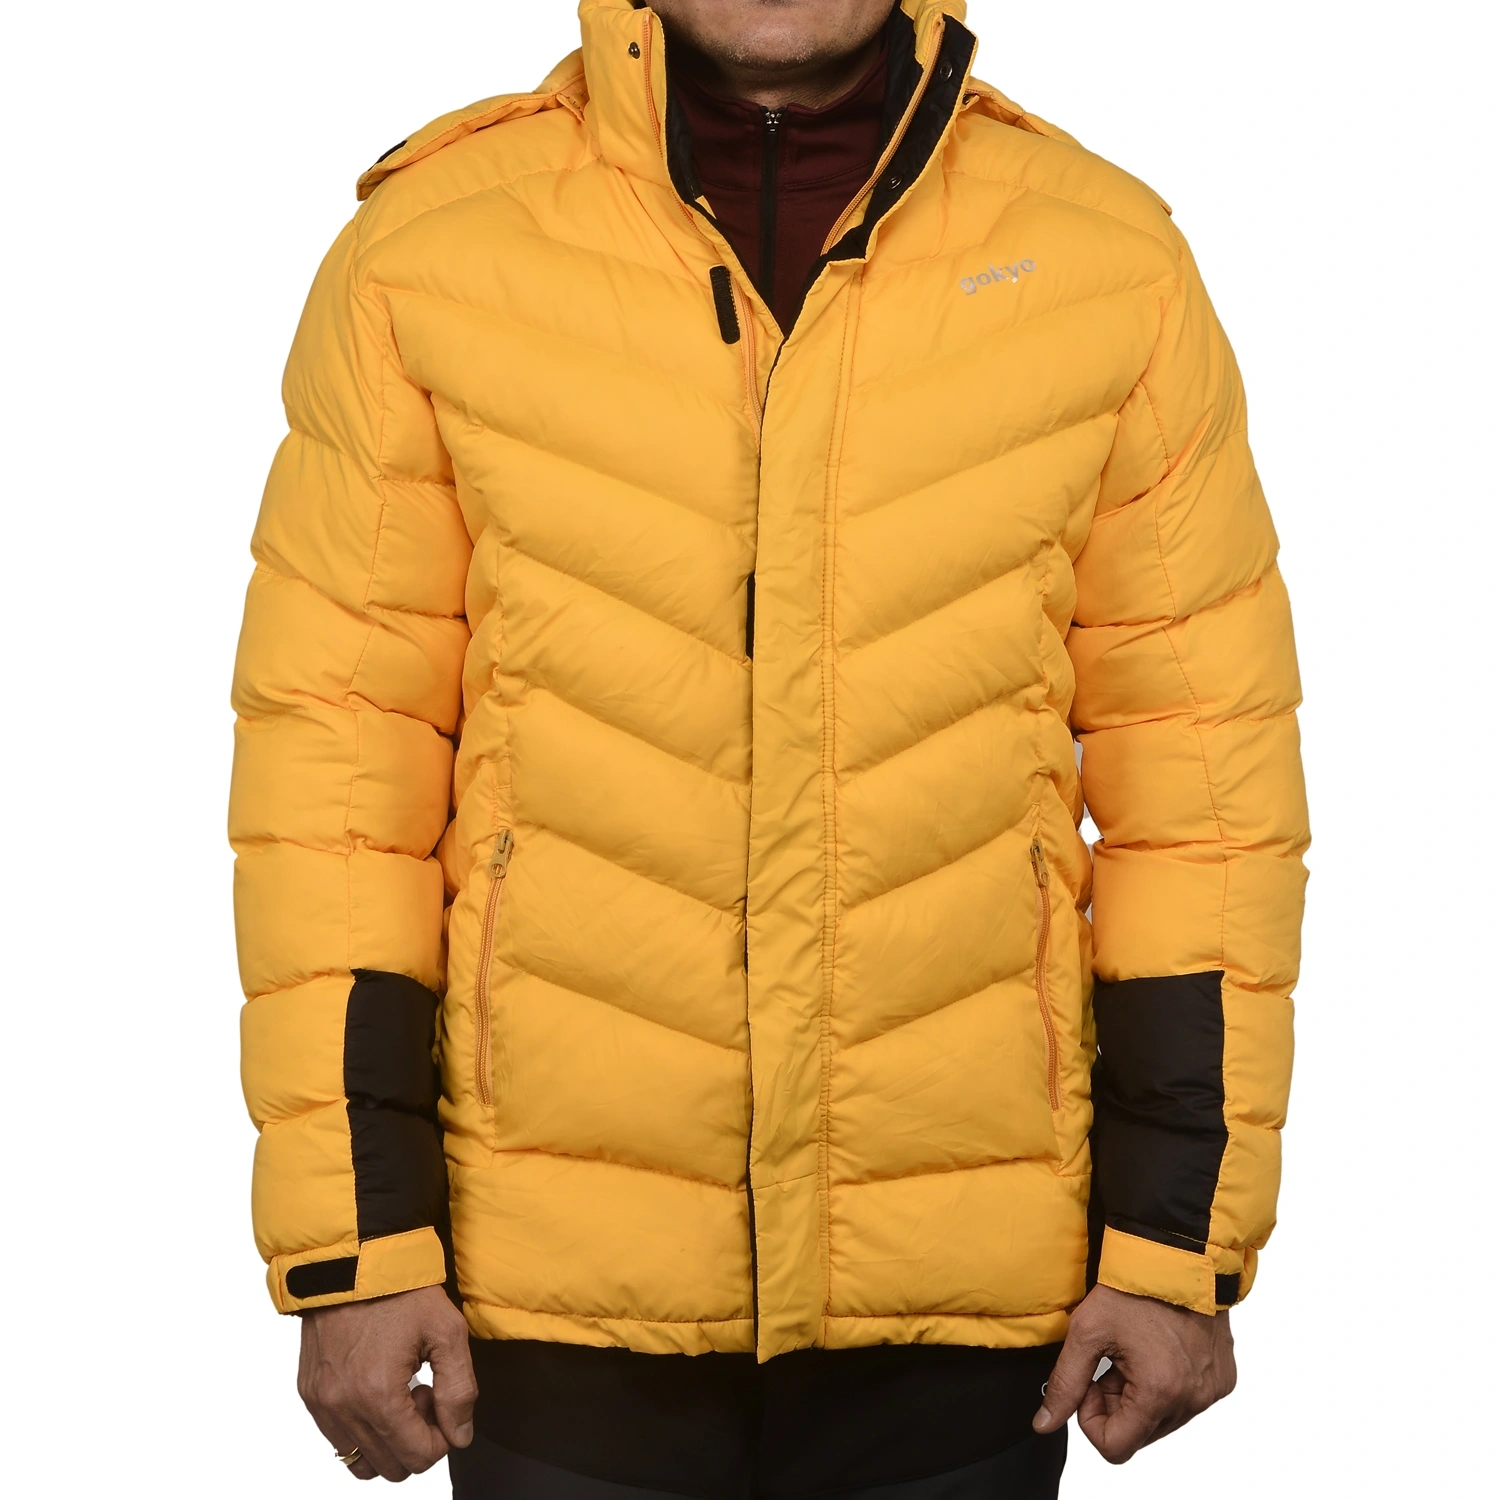 K2 Survivor Down Jacket for Men: Stylized Functionality for Extreme Cold Weather Expeditions (Up to -20°C)-230211